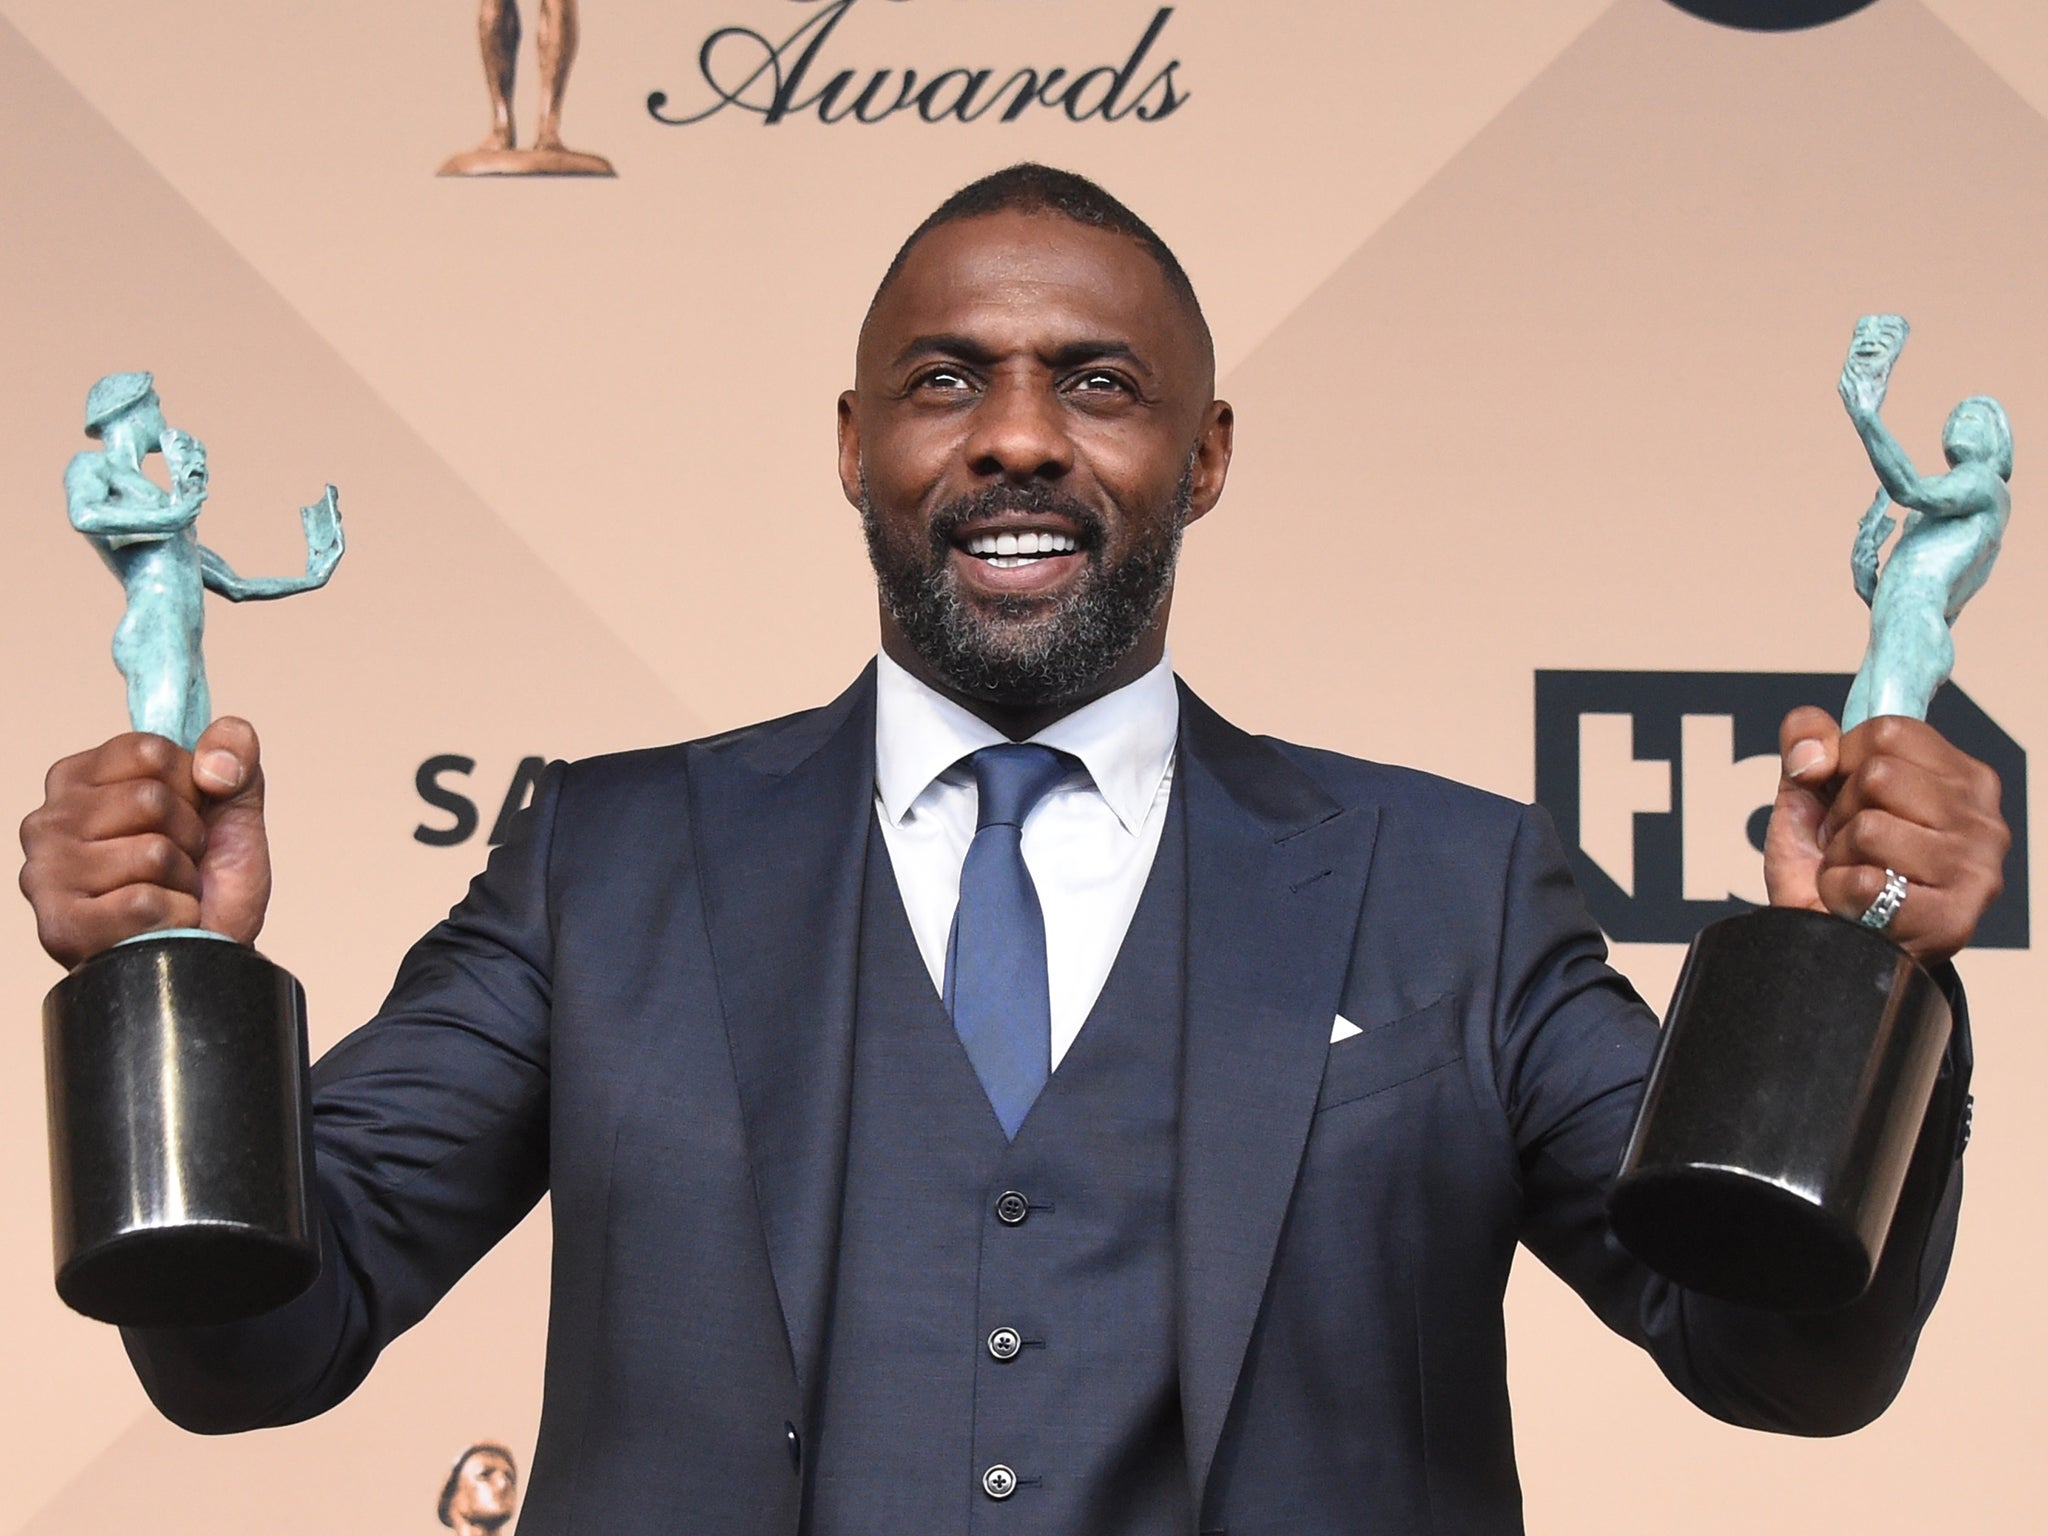 Actor Idris Elba poses in the press room after winning Outstanding Performance by a Male Actor in a Supporting Role award for 'Beasts of No Nation' during the 22nd Annual Screen Actors Guild Awards at The Shrine Auditorium in Los Angeles